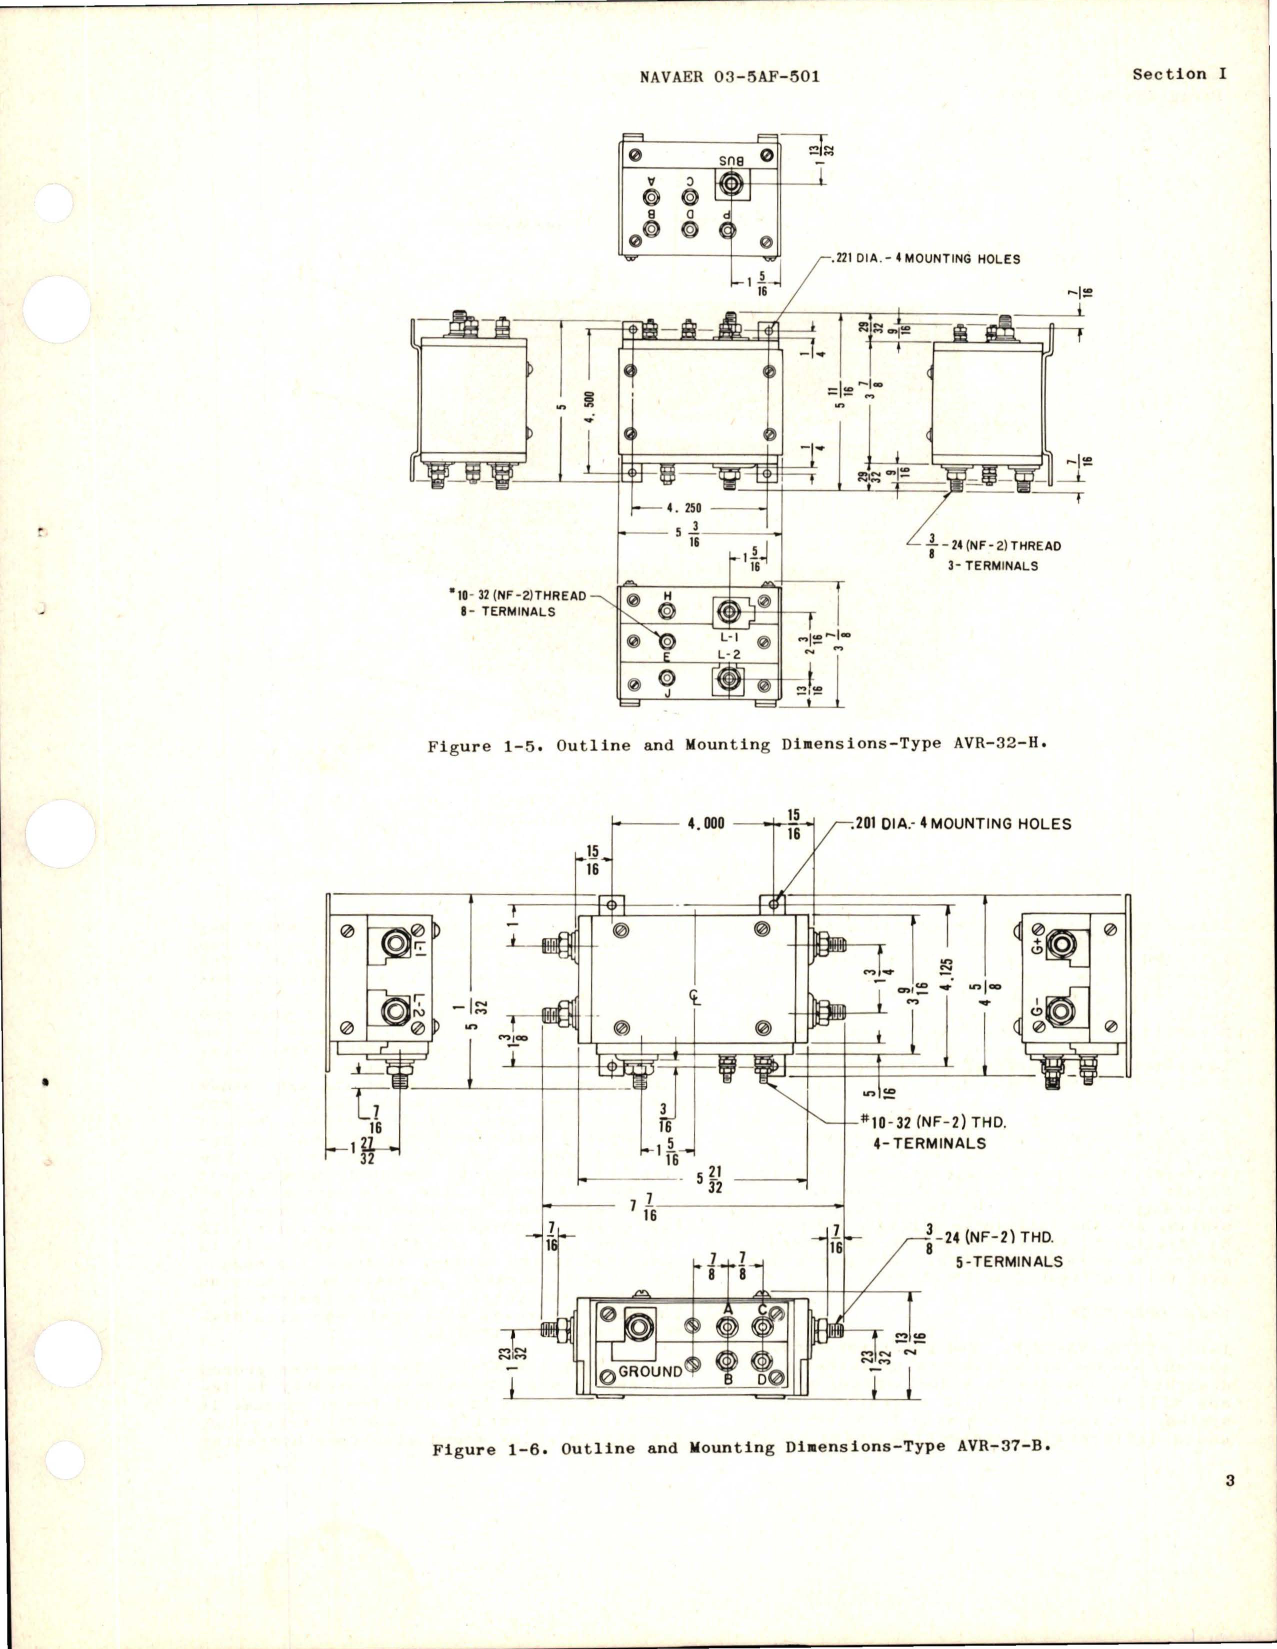 Sample page 7 from AirCorps Library document: Operation, Service and Overhaul Instructions with Parts Catalog for Generator Contactor and Feeder Protection Relay Assembly